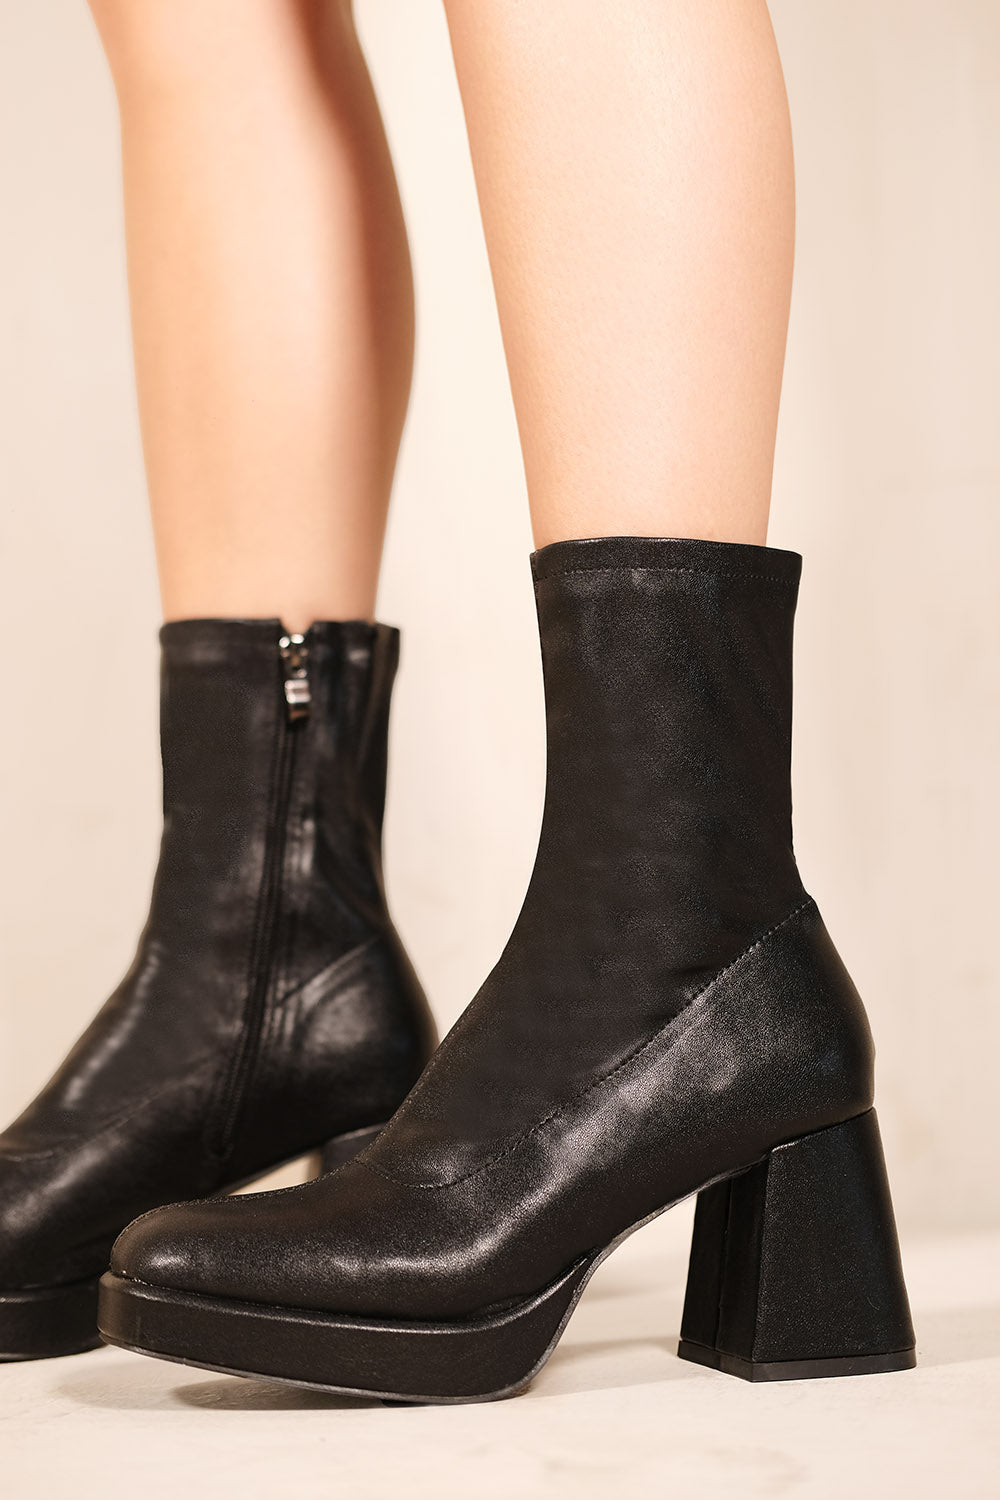 LAURIE MID FLARE BLOCK HEEL ANKLE BOOTS IN BLACK FAUX LEATHER